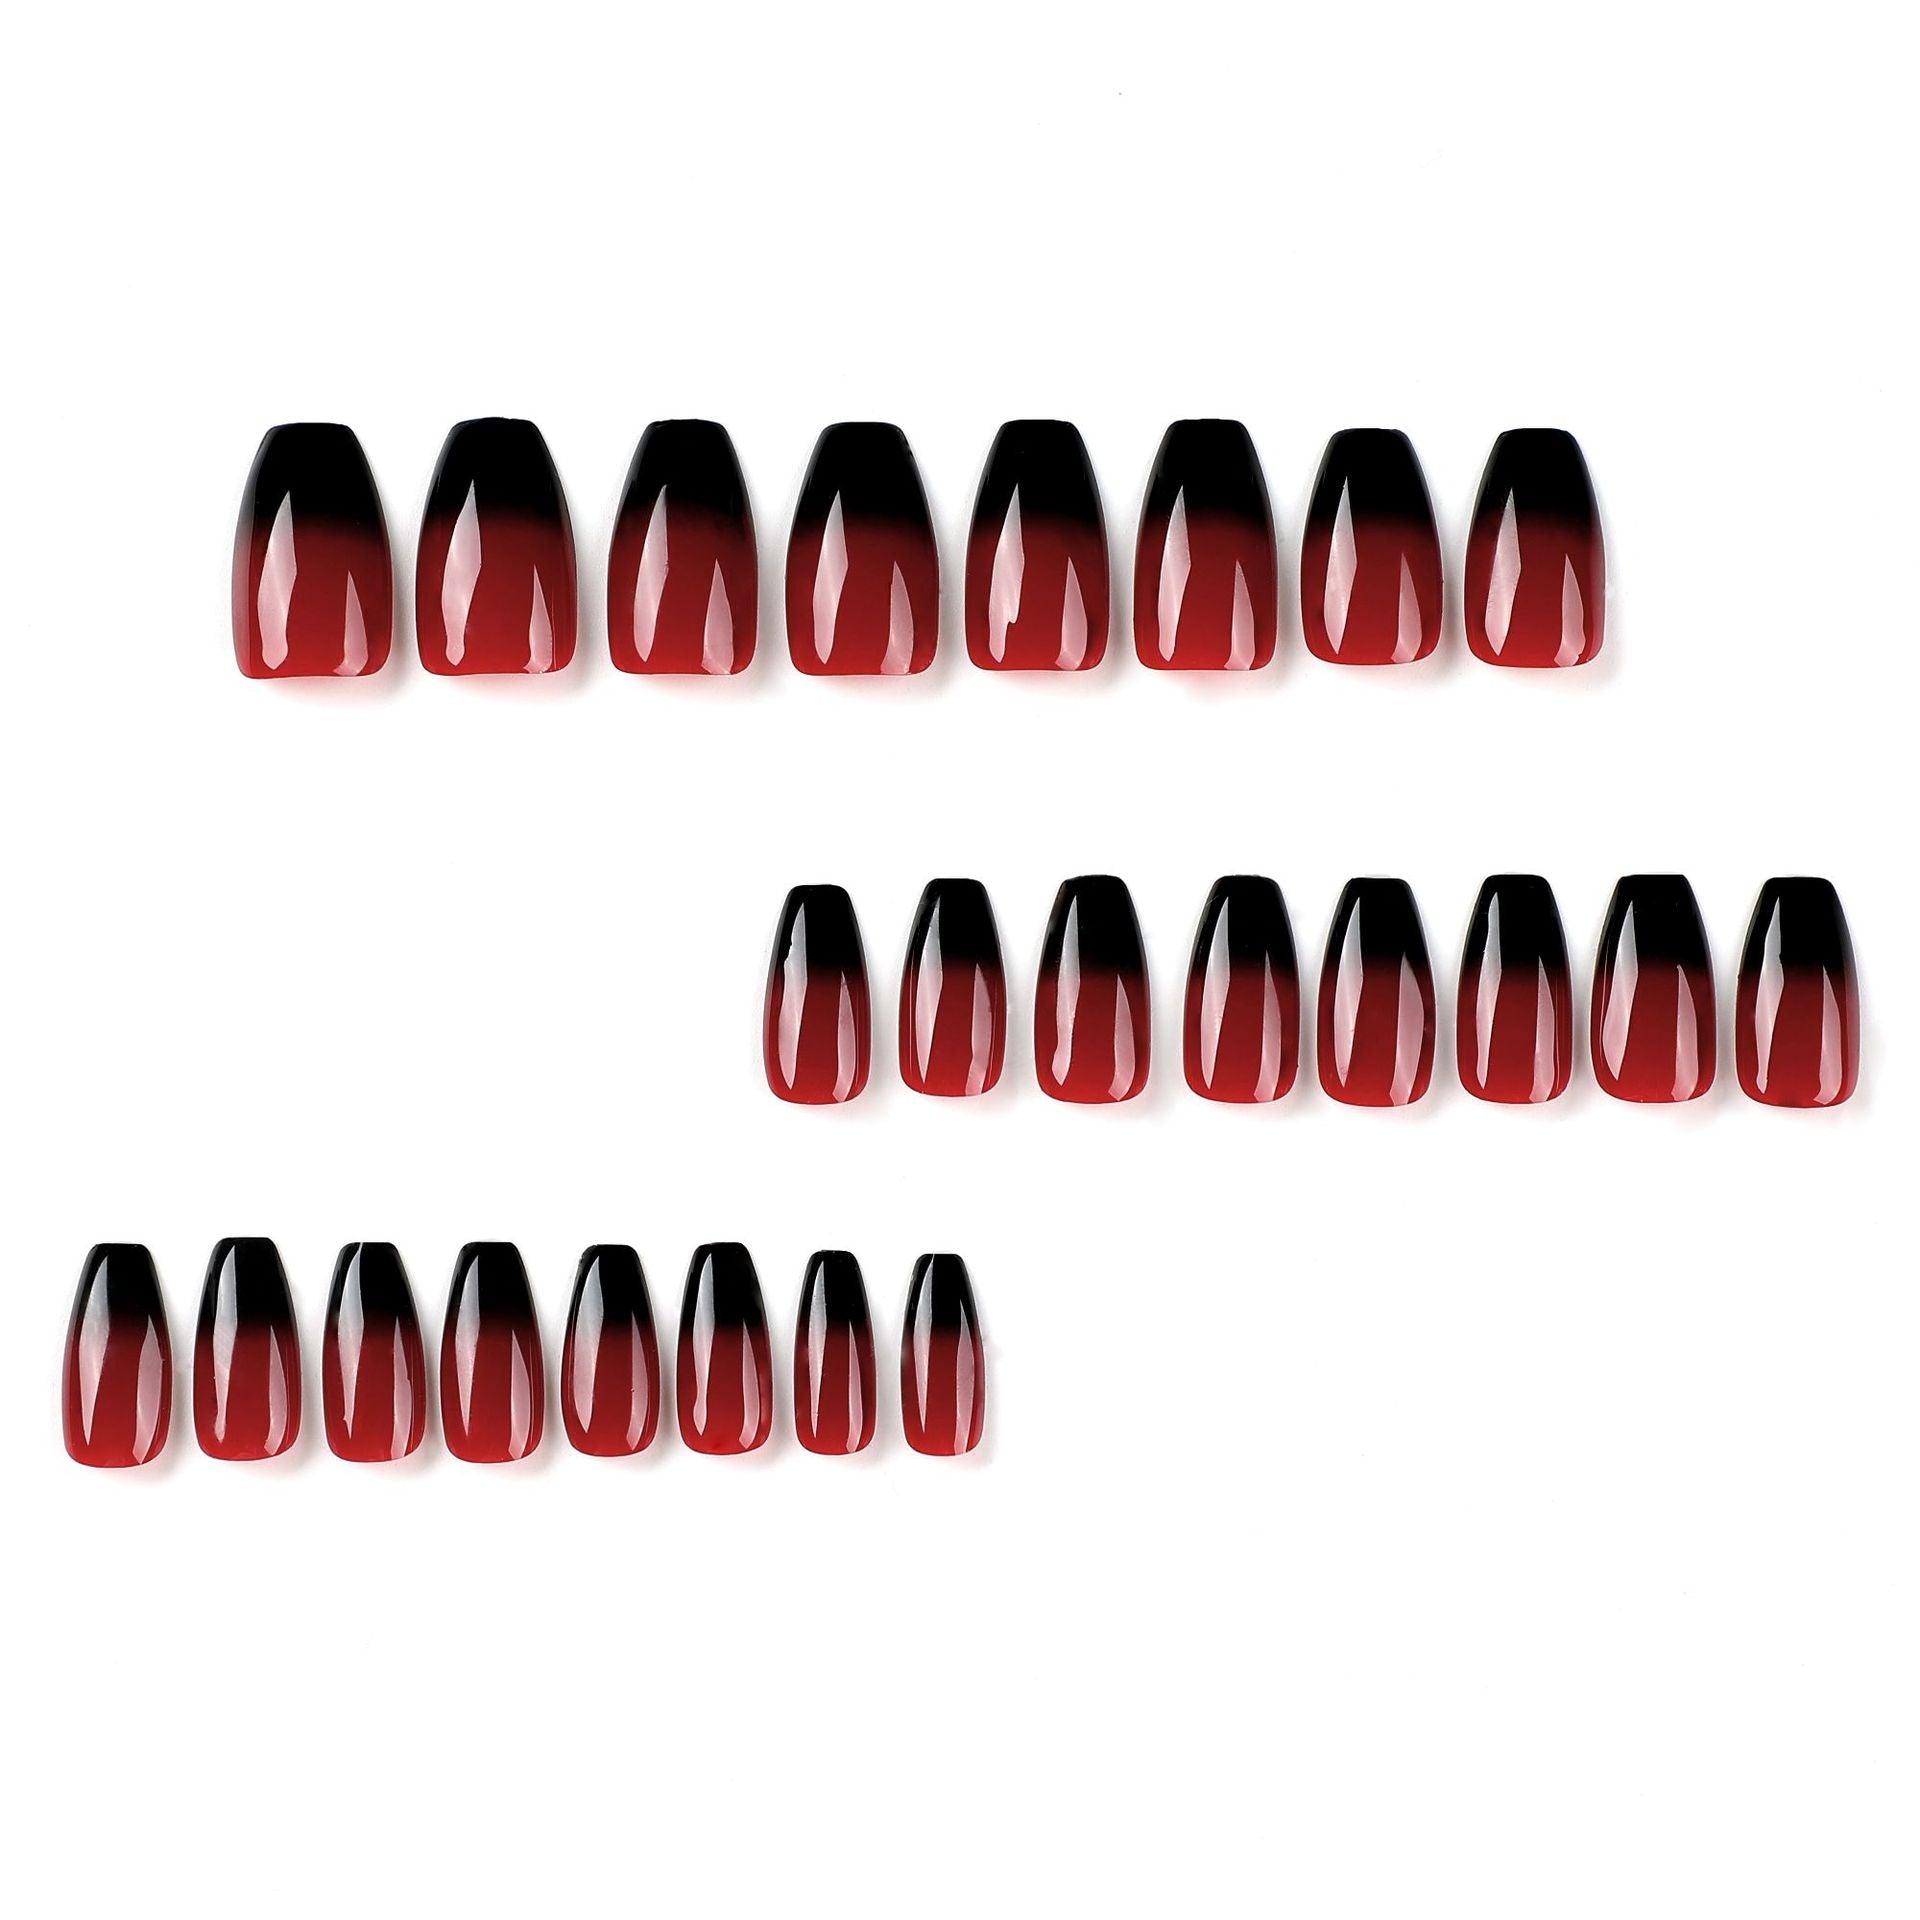 Glamour Black and Red Ombre Medium Length Press On Nails – Belle